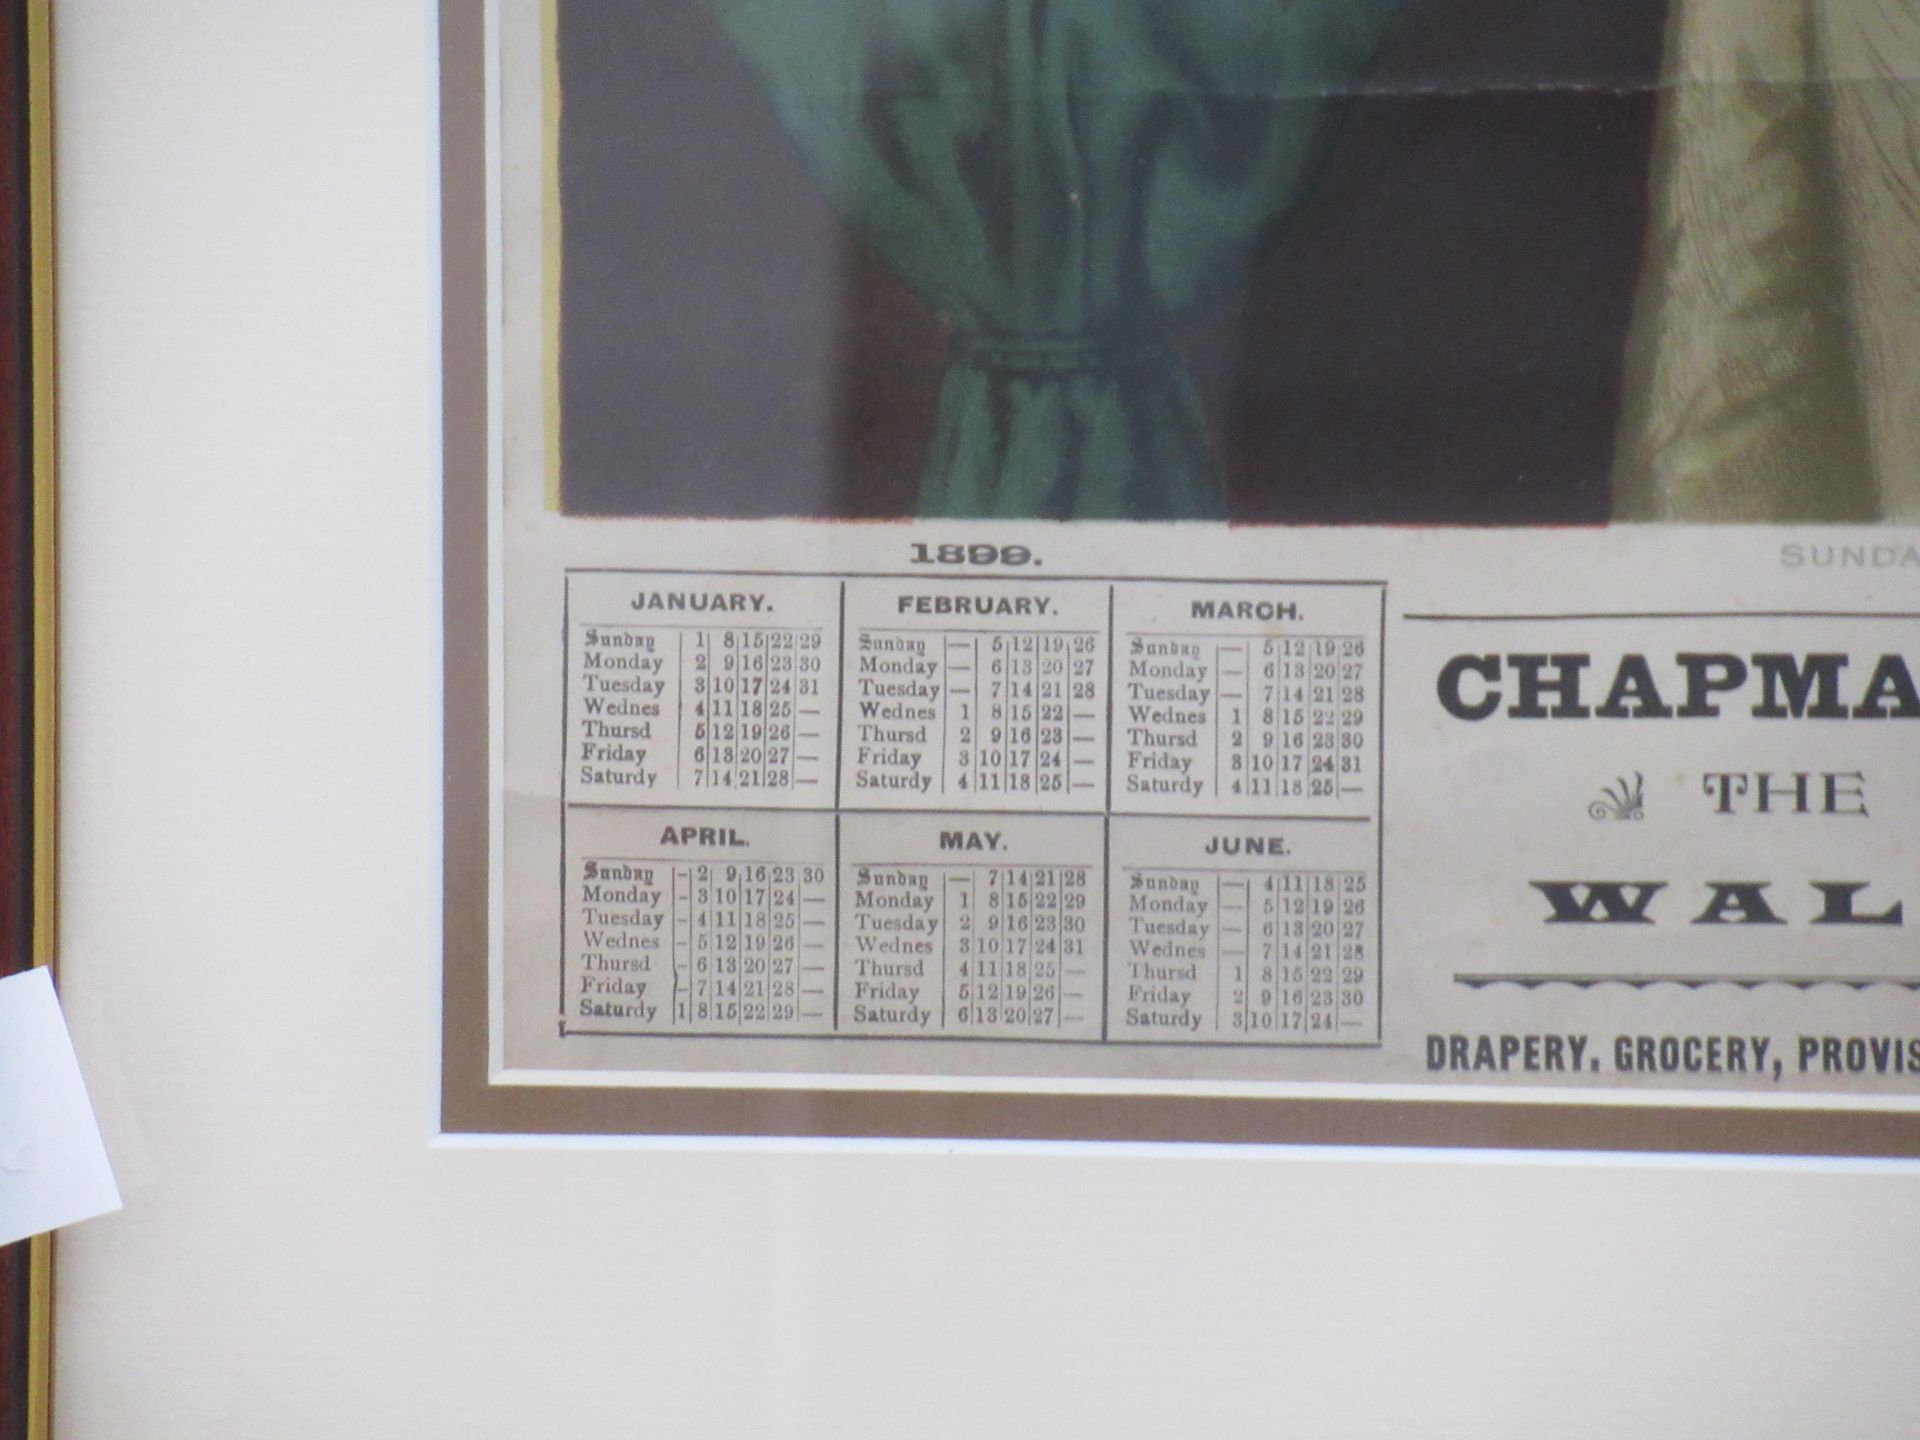 Chapman and C, Waltham- The Stores 'Sunday Morning' 1899 calendar in frame (35cm x 54cm) - Image 4 of 6